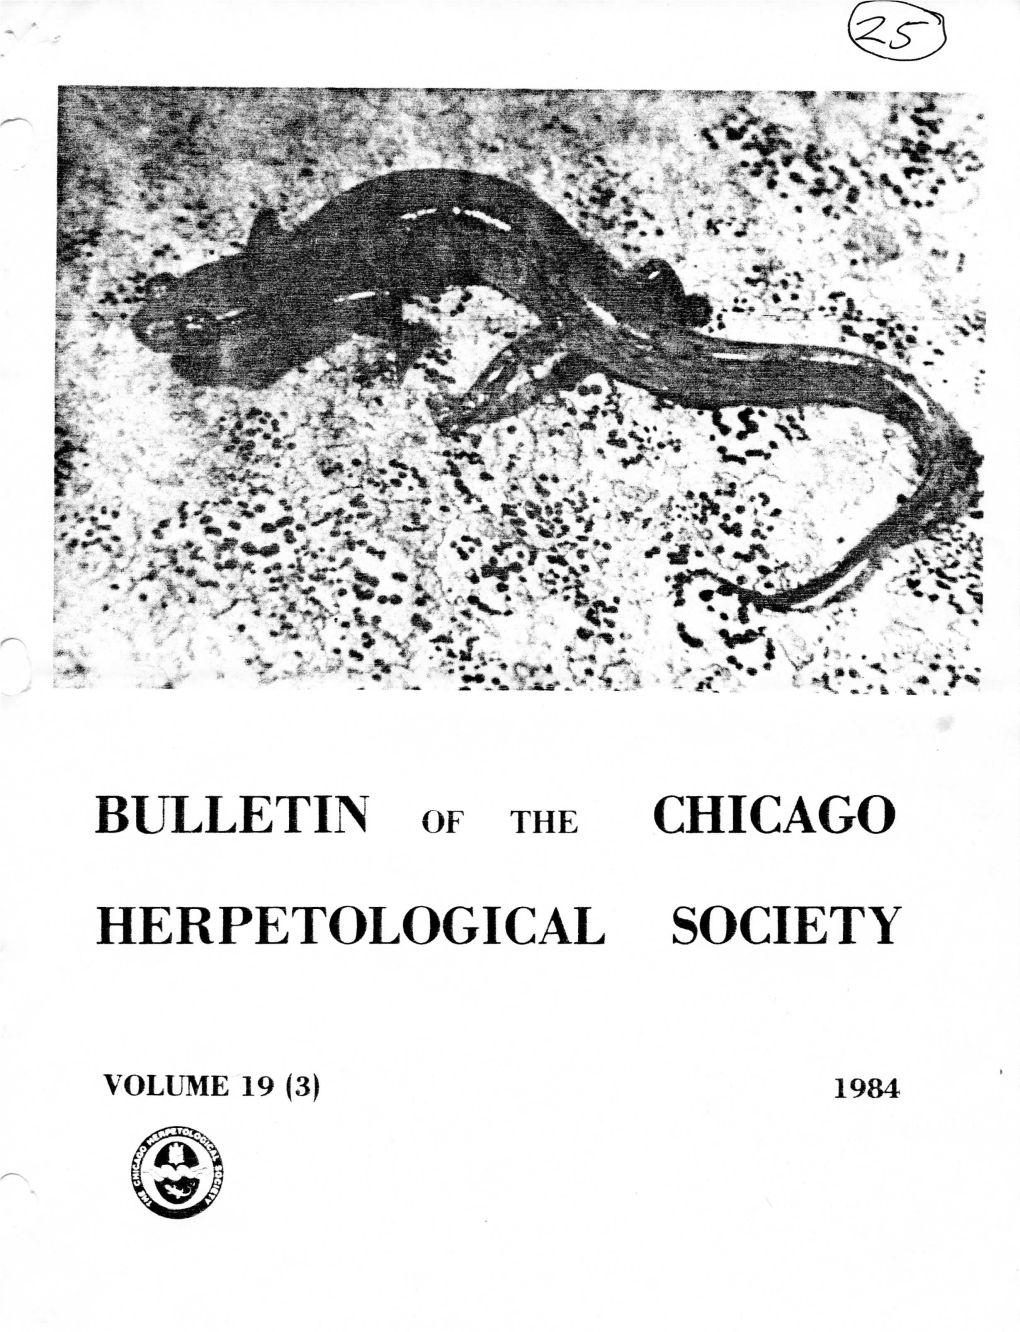 Bulletin of the Chicago Herpetological Society Issn 0009-3464